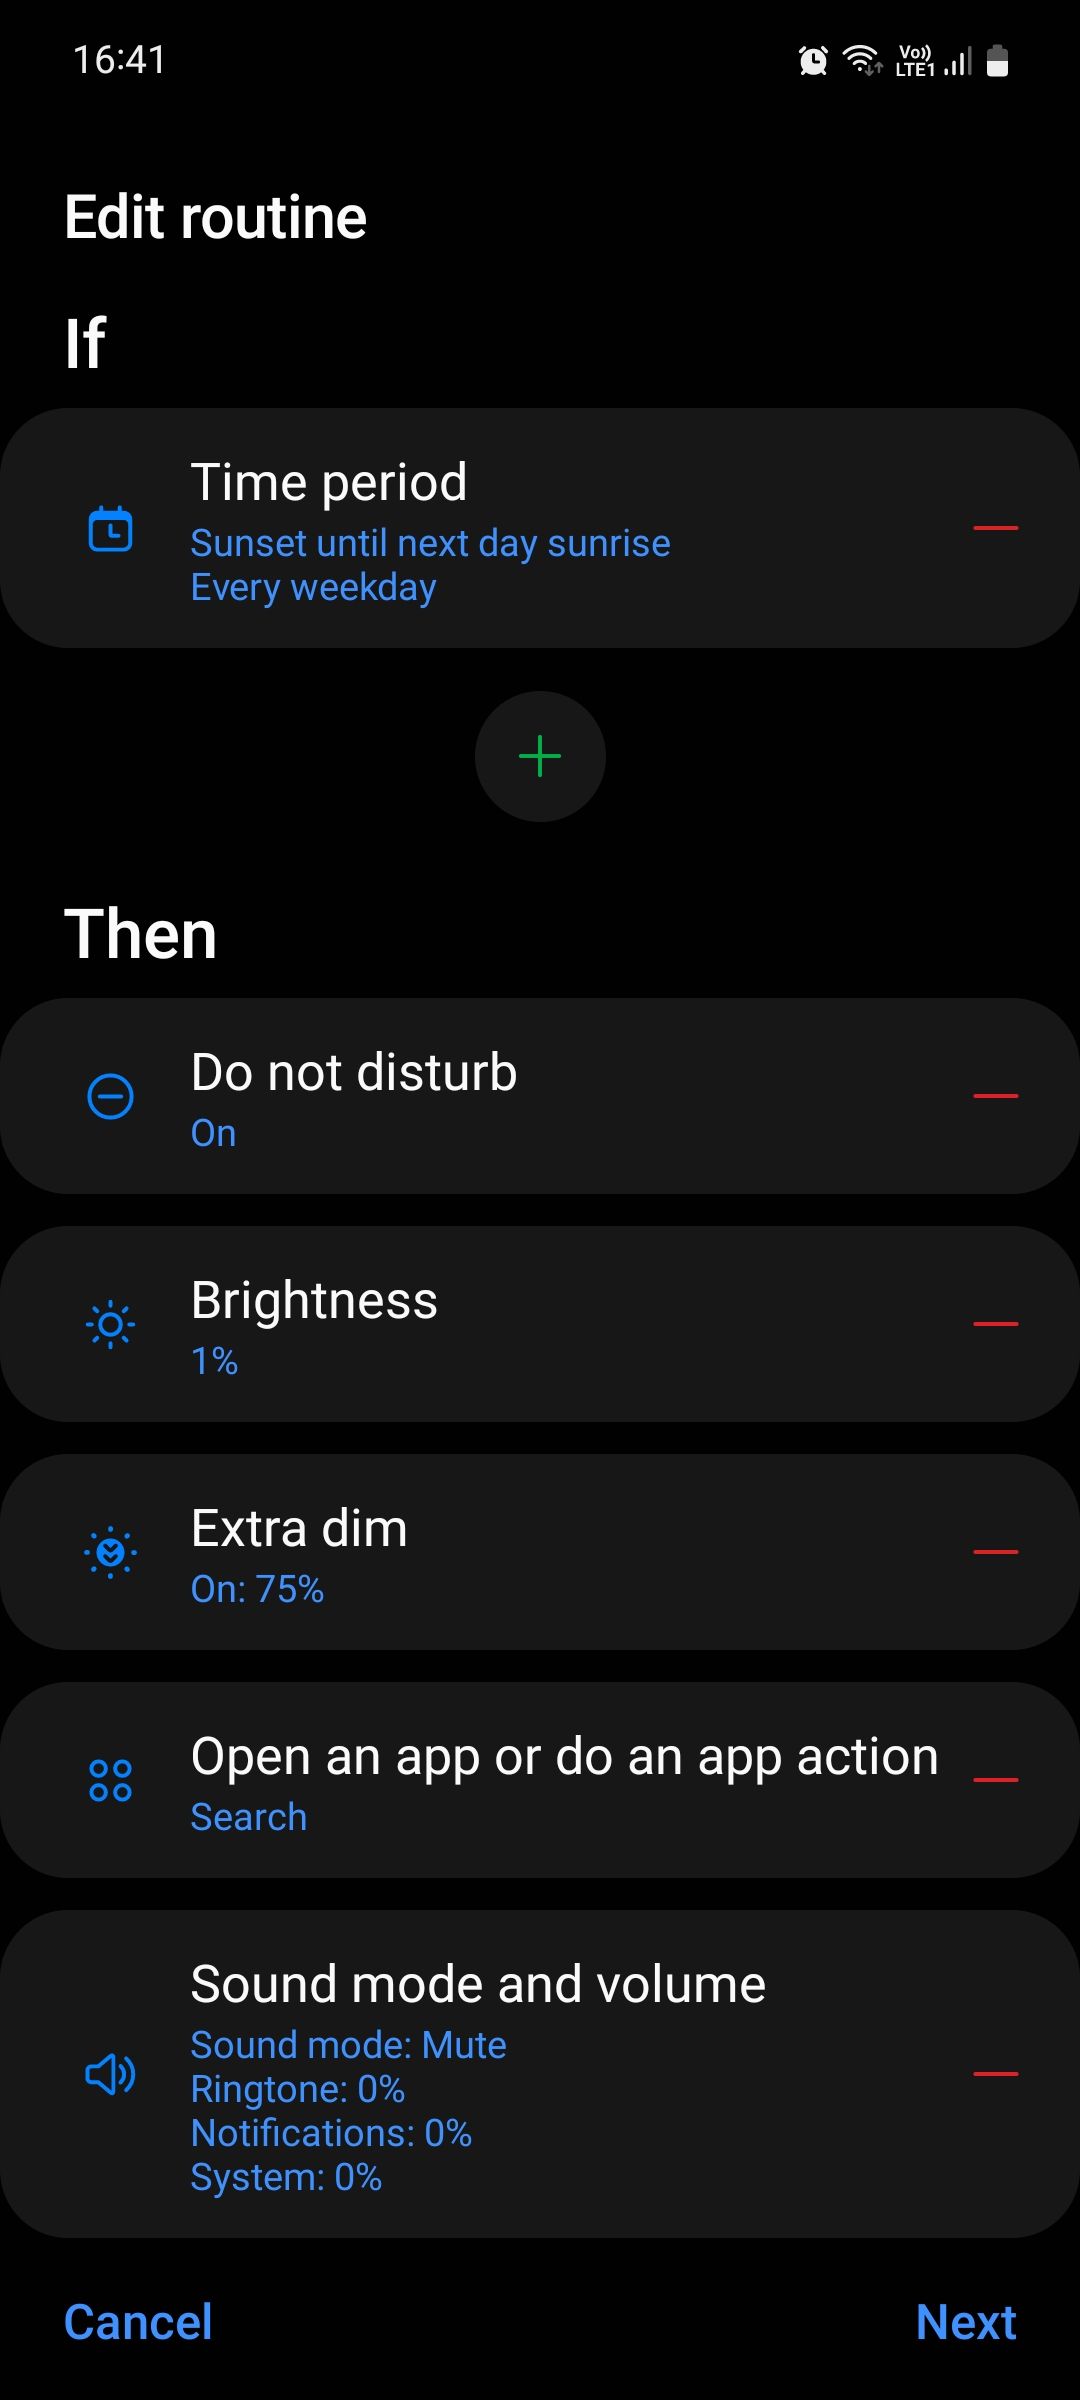 Samsung Bixby Routines Edit routine example